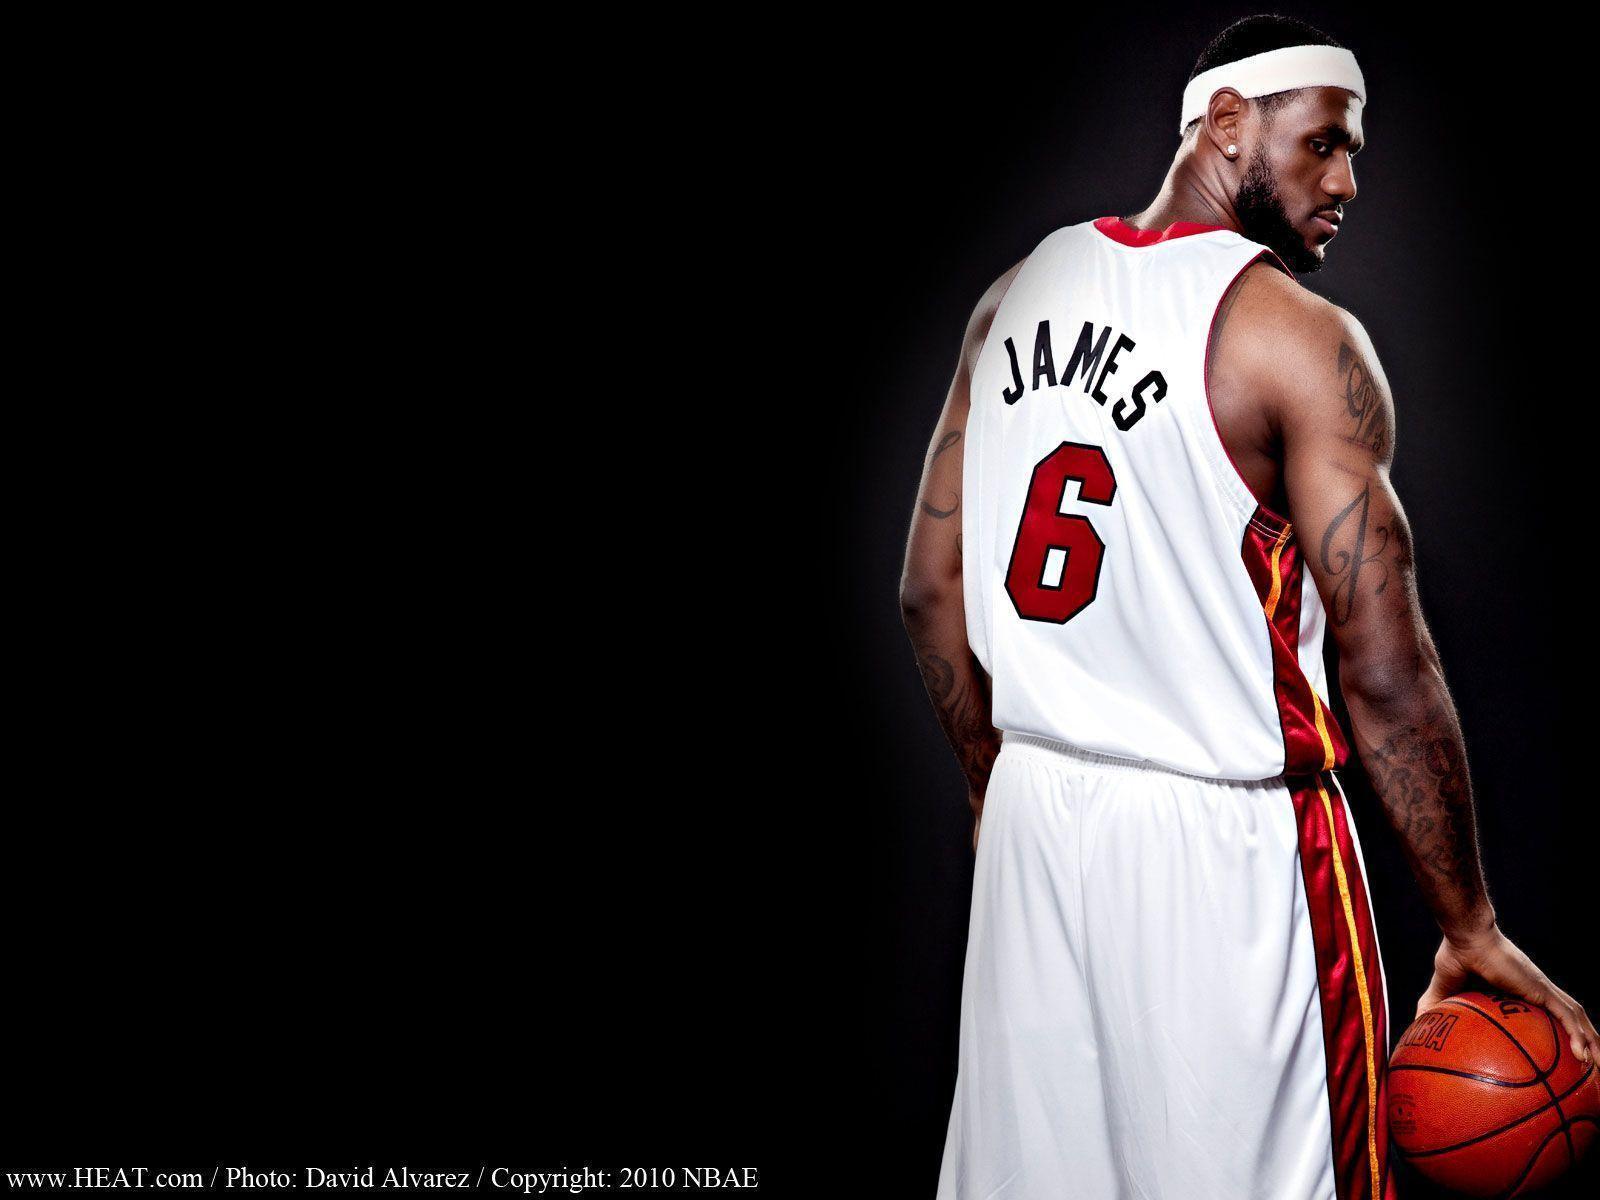 LeBron James Wallpapers - Top 45 Best Lebron James Wallpapers [ HQ ]